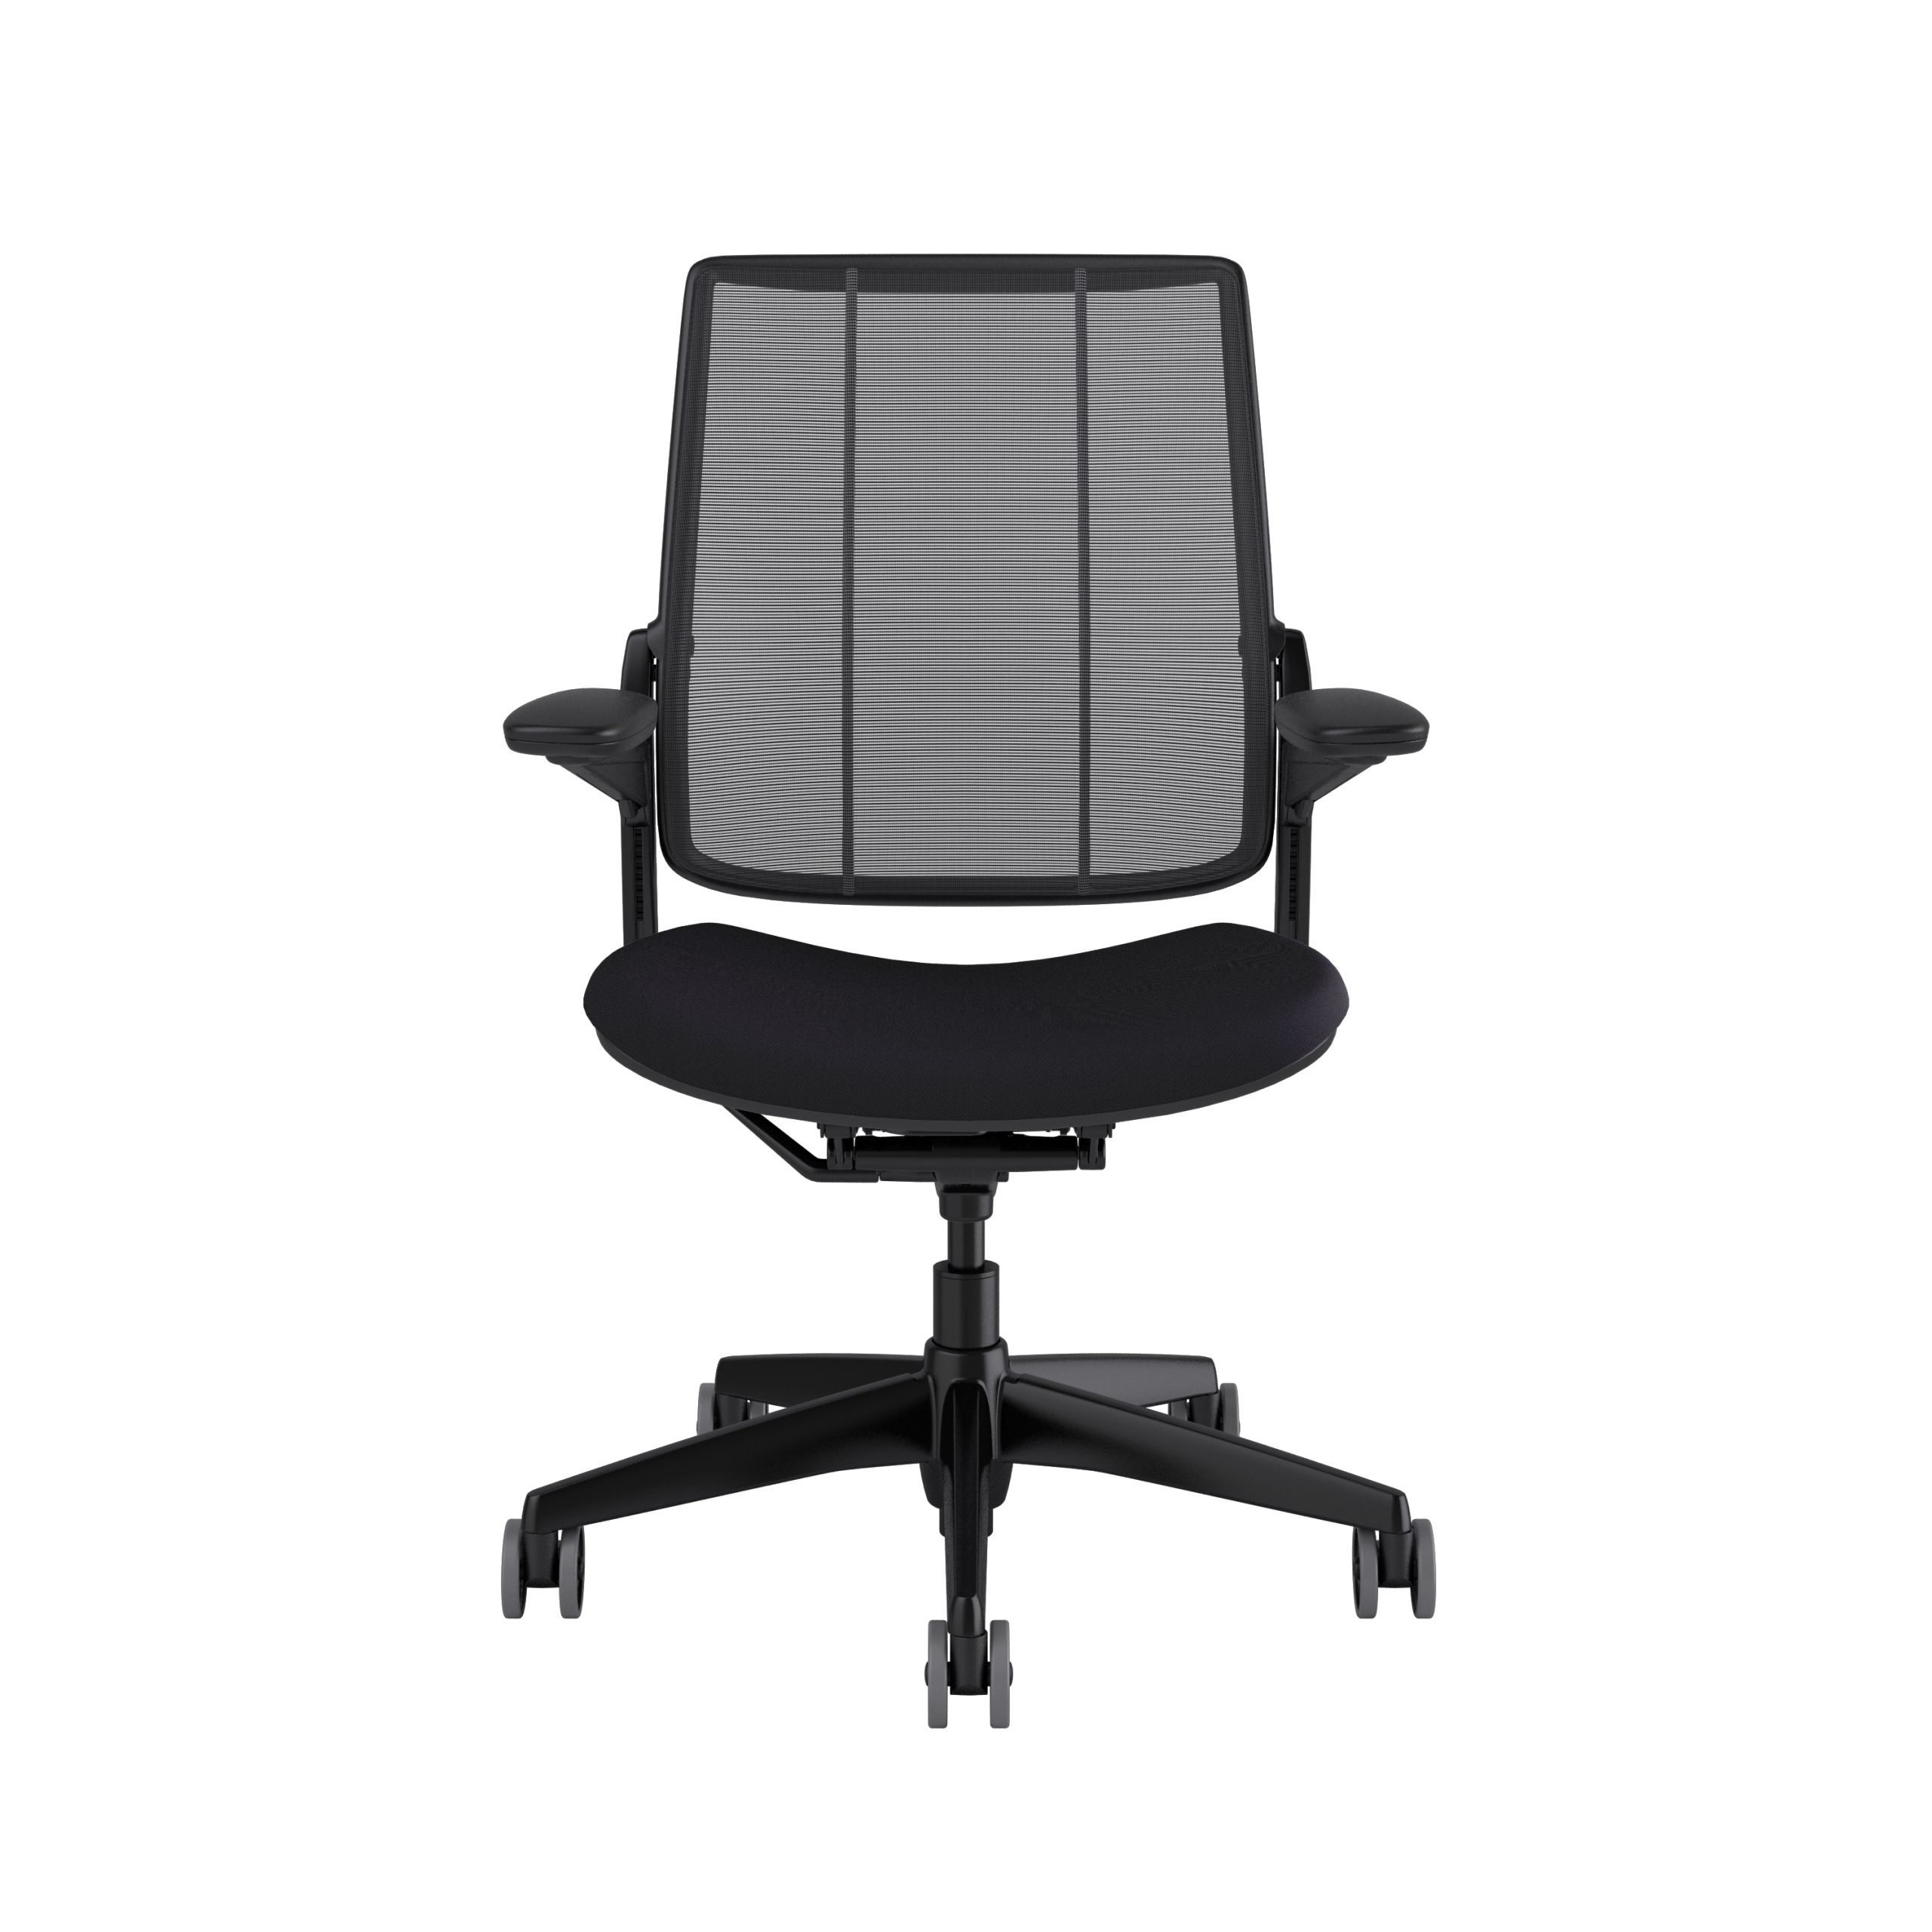 Buy Humanscale Ergonomic Products Online In India